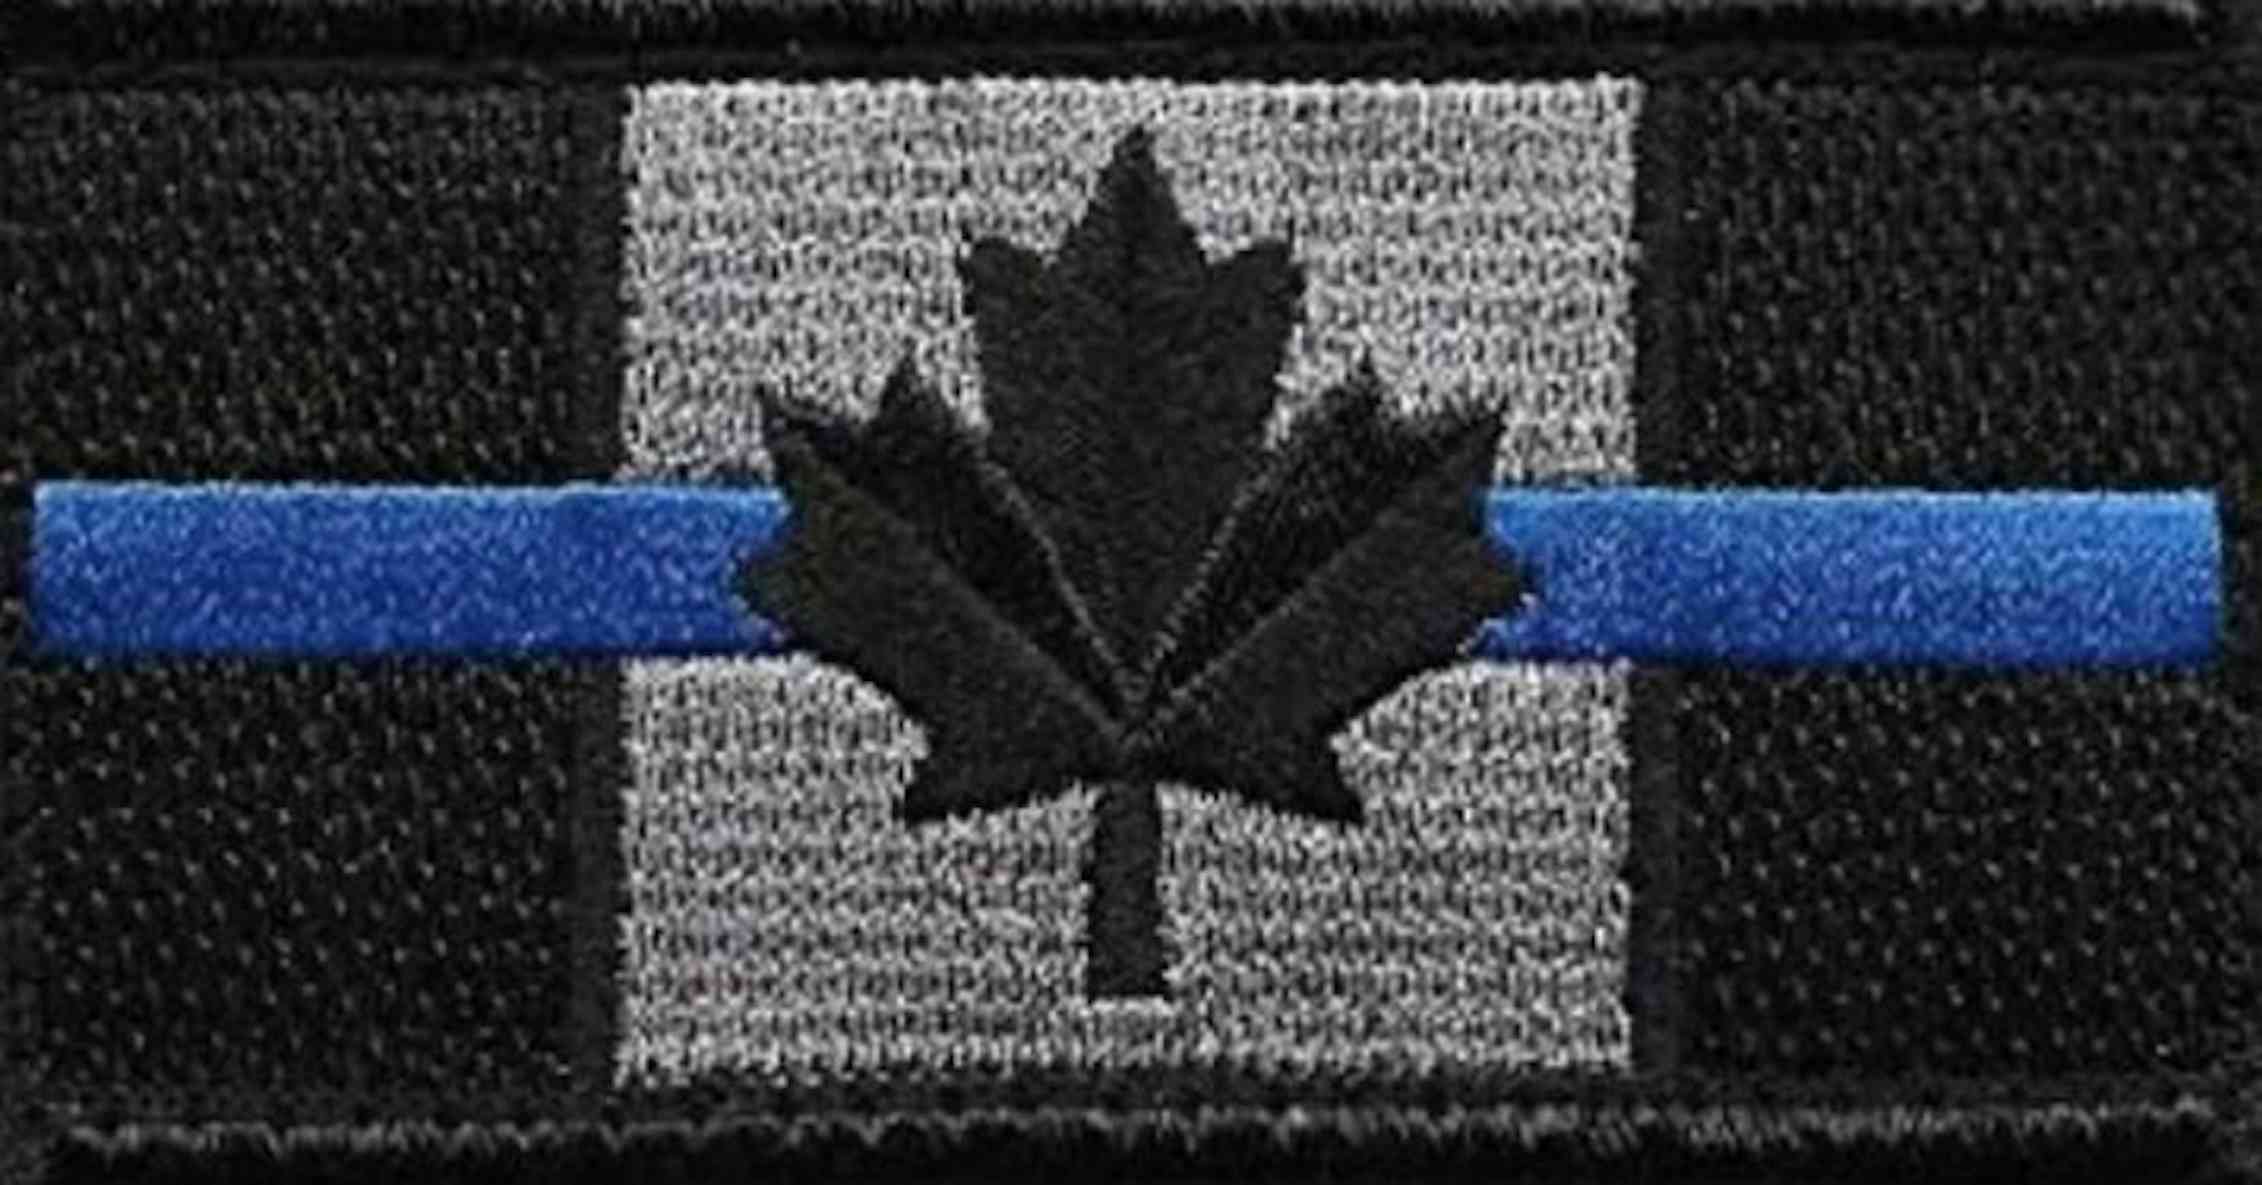 A cloth badge: Black and white Canadian flag with a horizontal thin blue line through it.